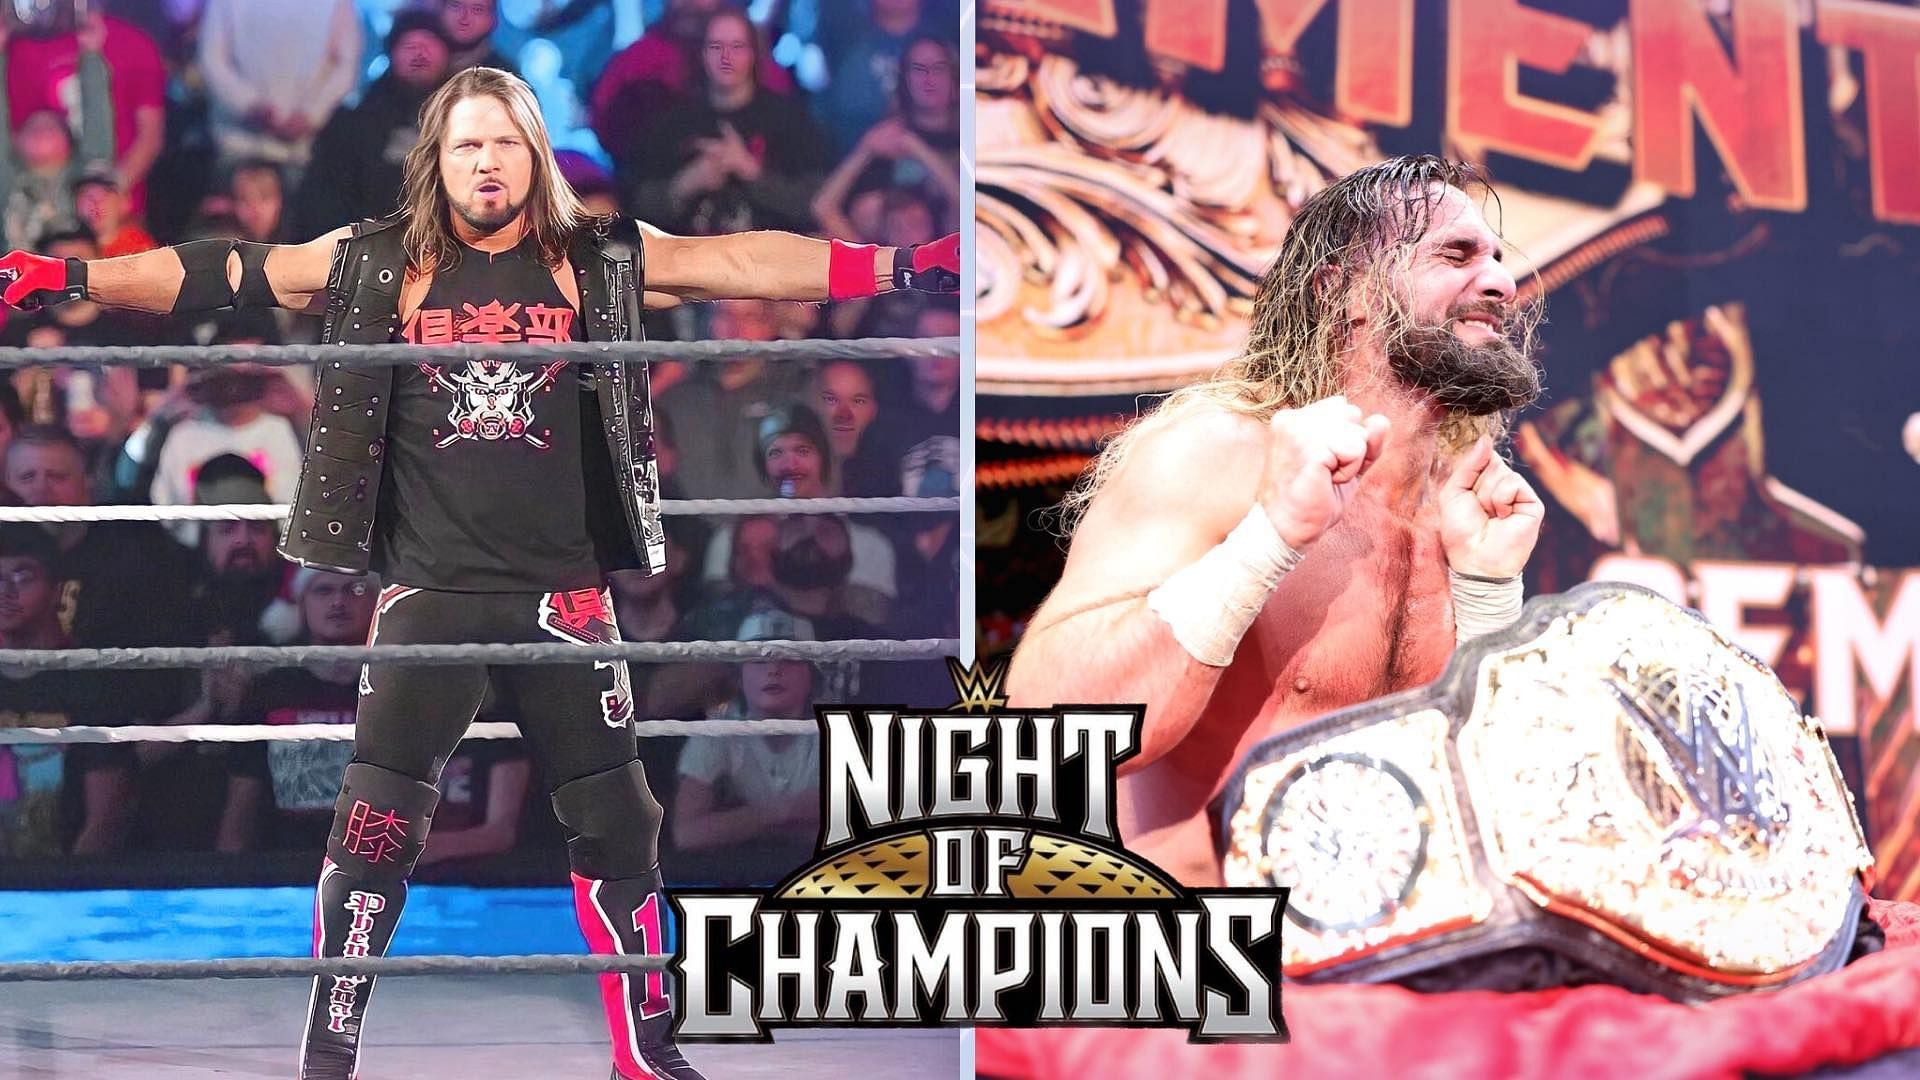 AJ Styles will clash with Seth Rollins at WWE Night of Champions